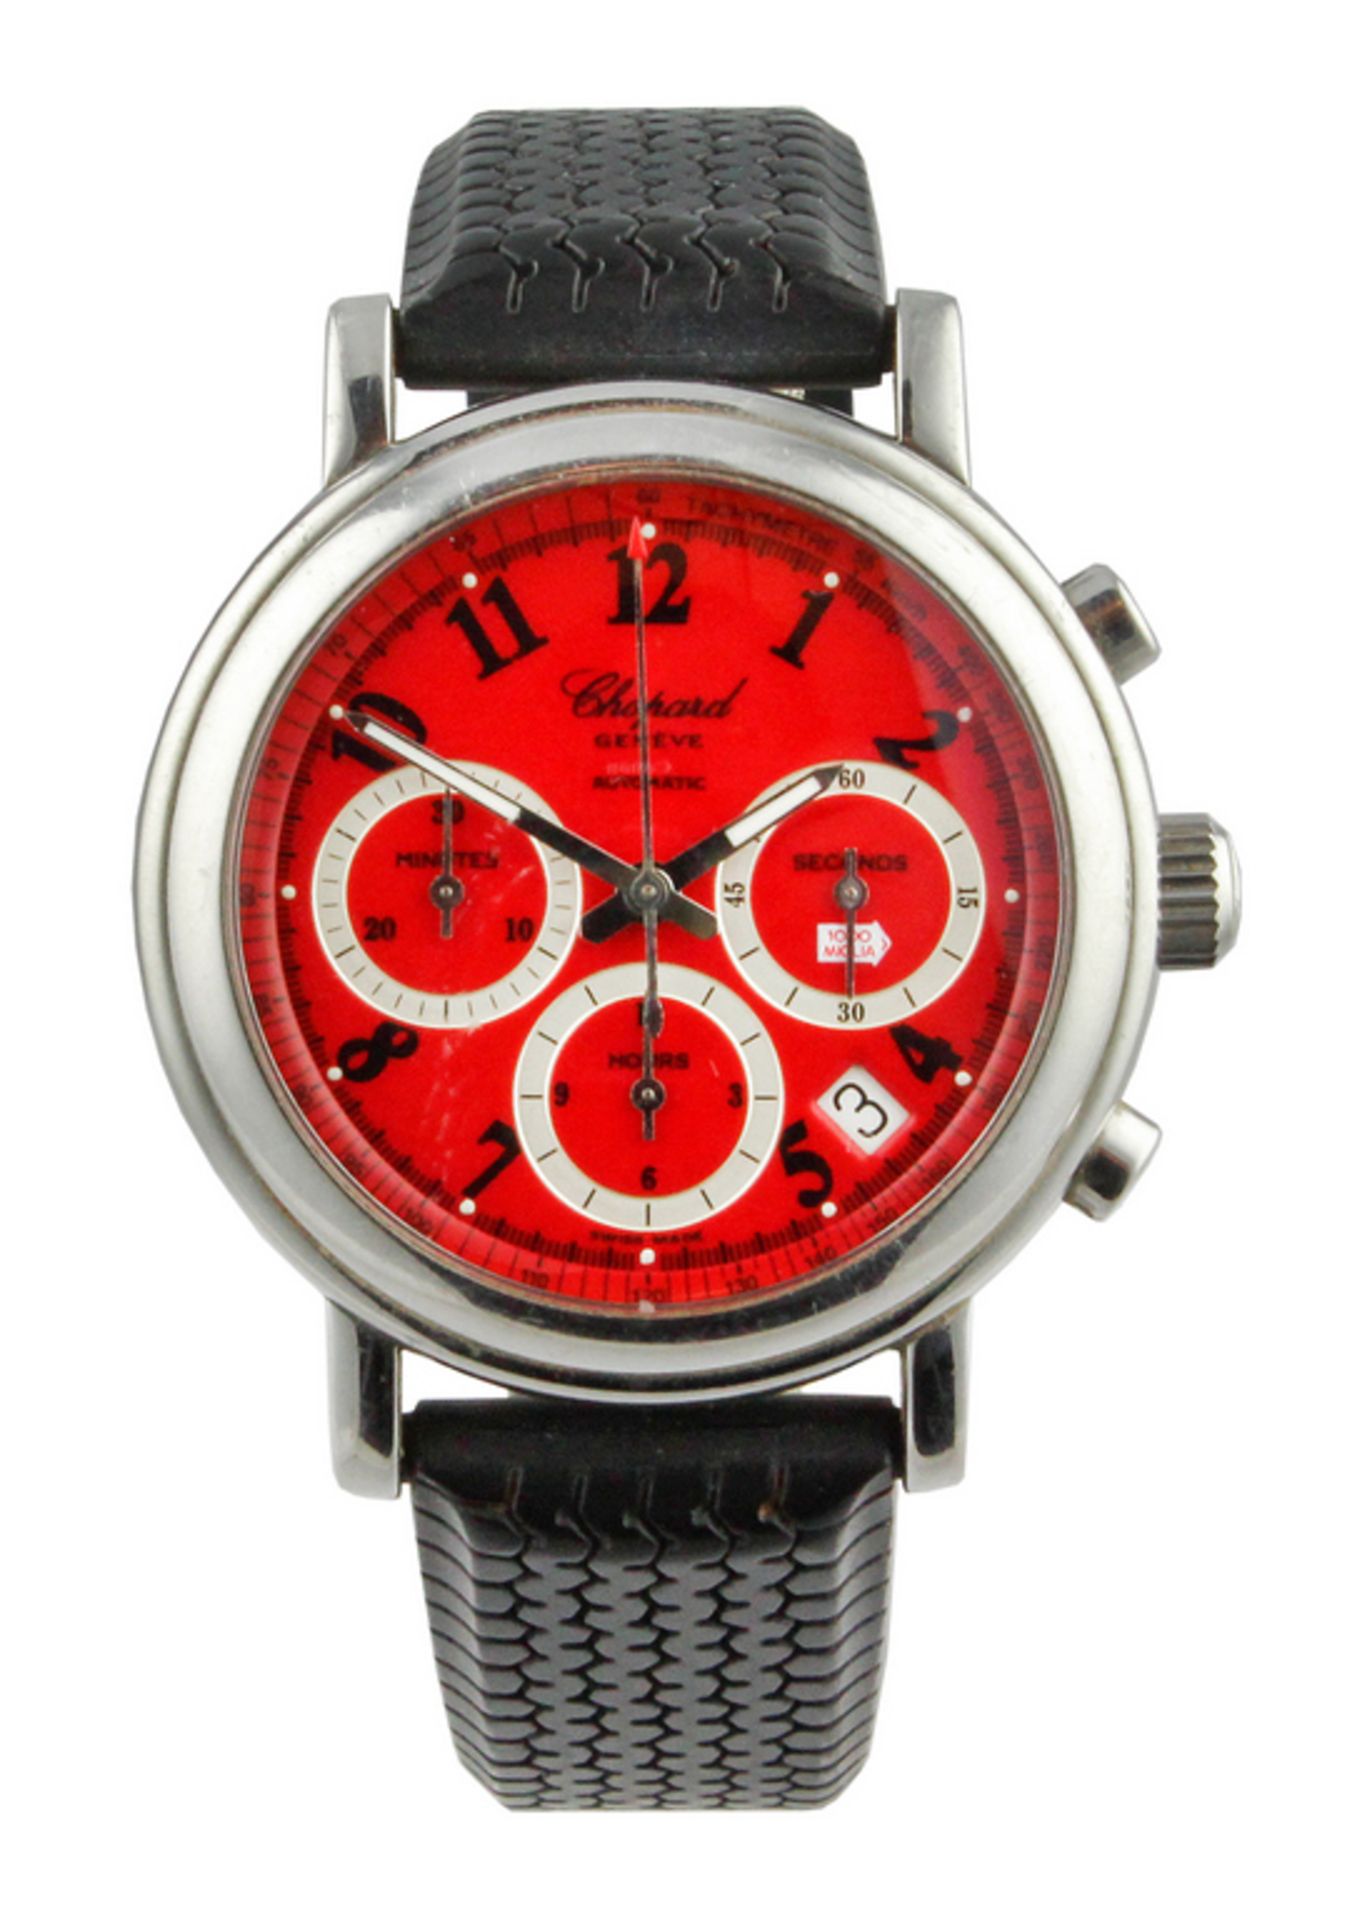 Chopard Mille-Miglia Automatic Chronograph with Rare Red Dial